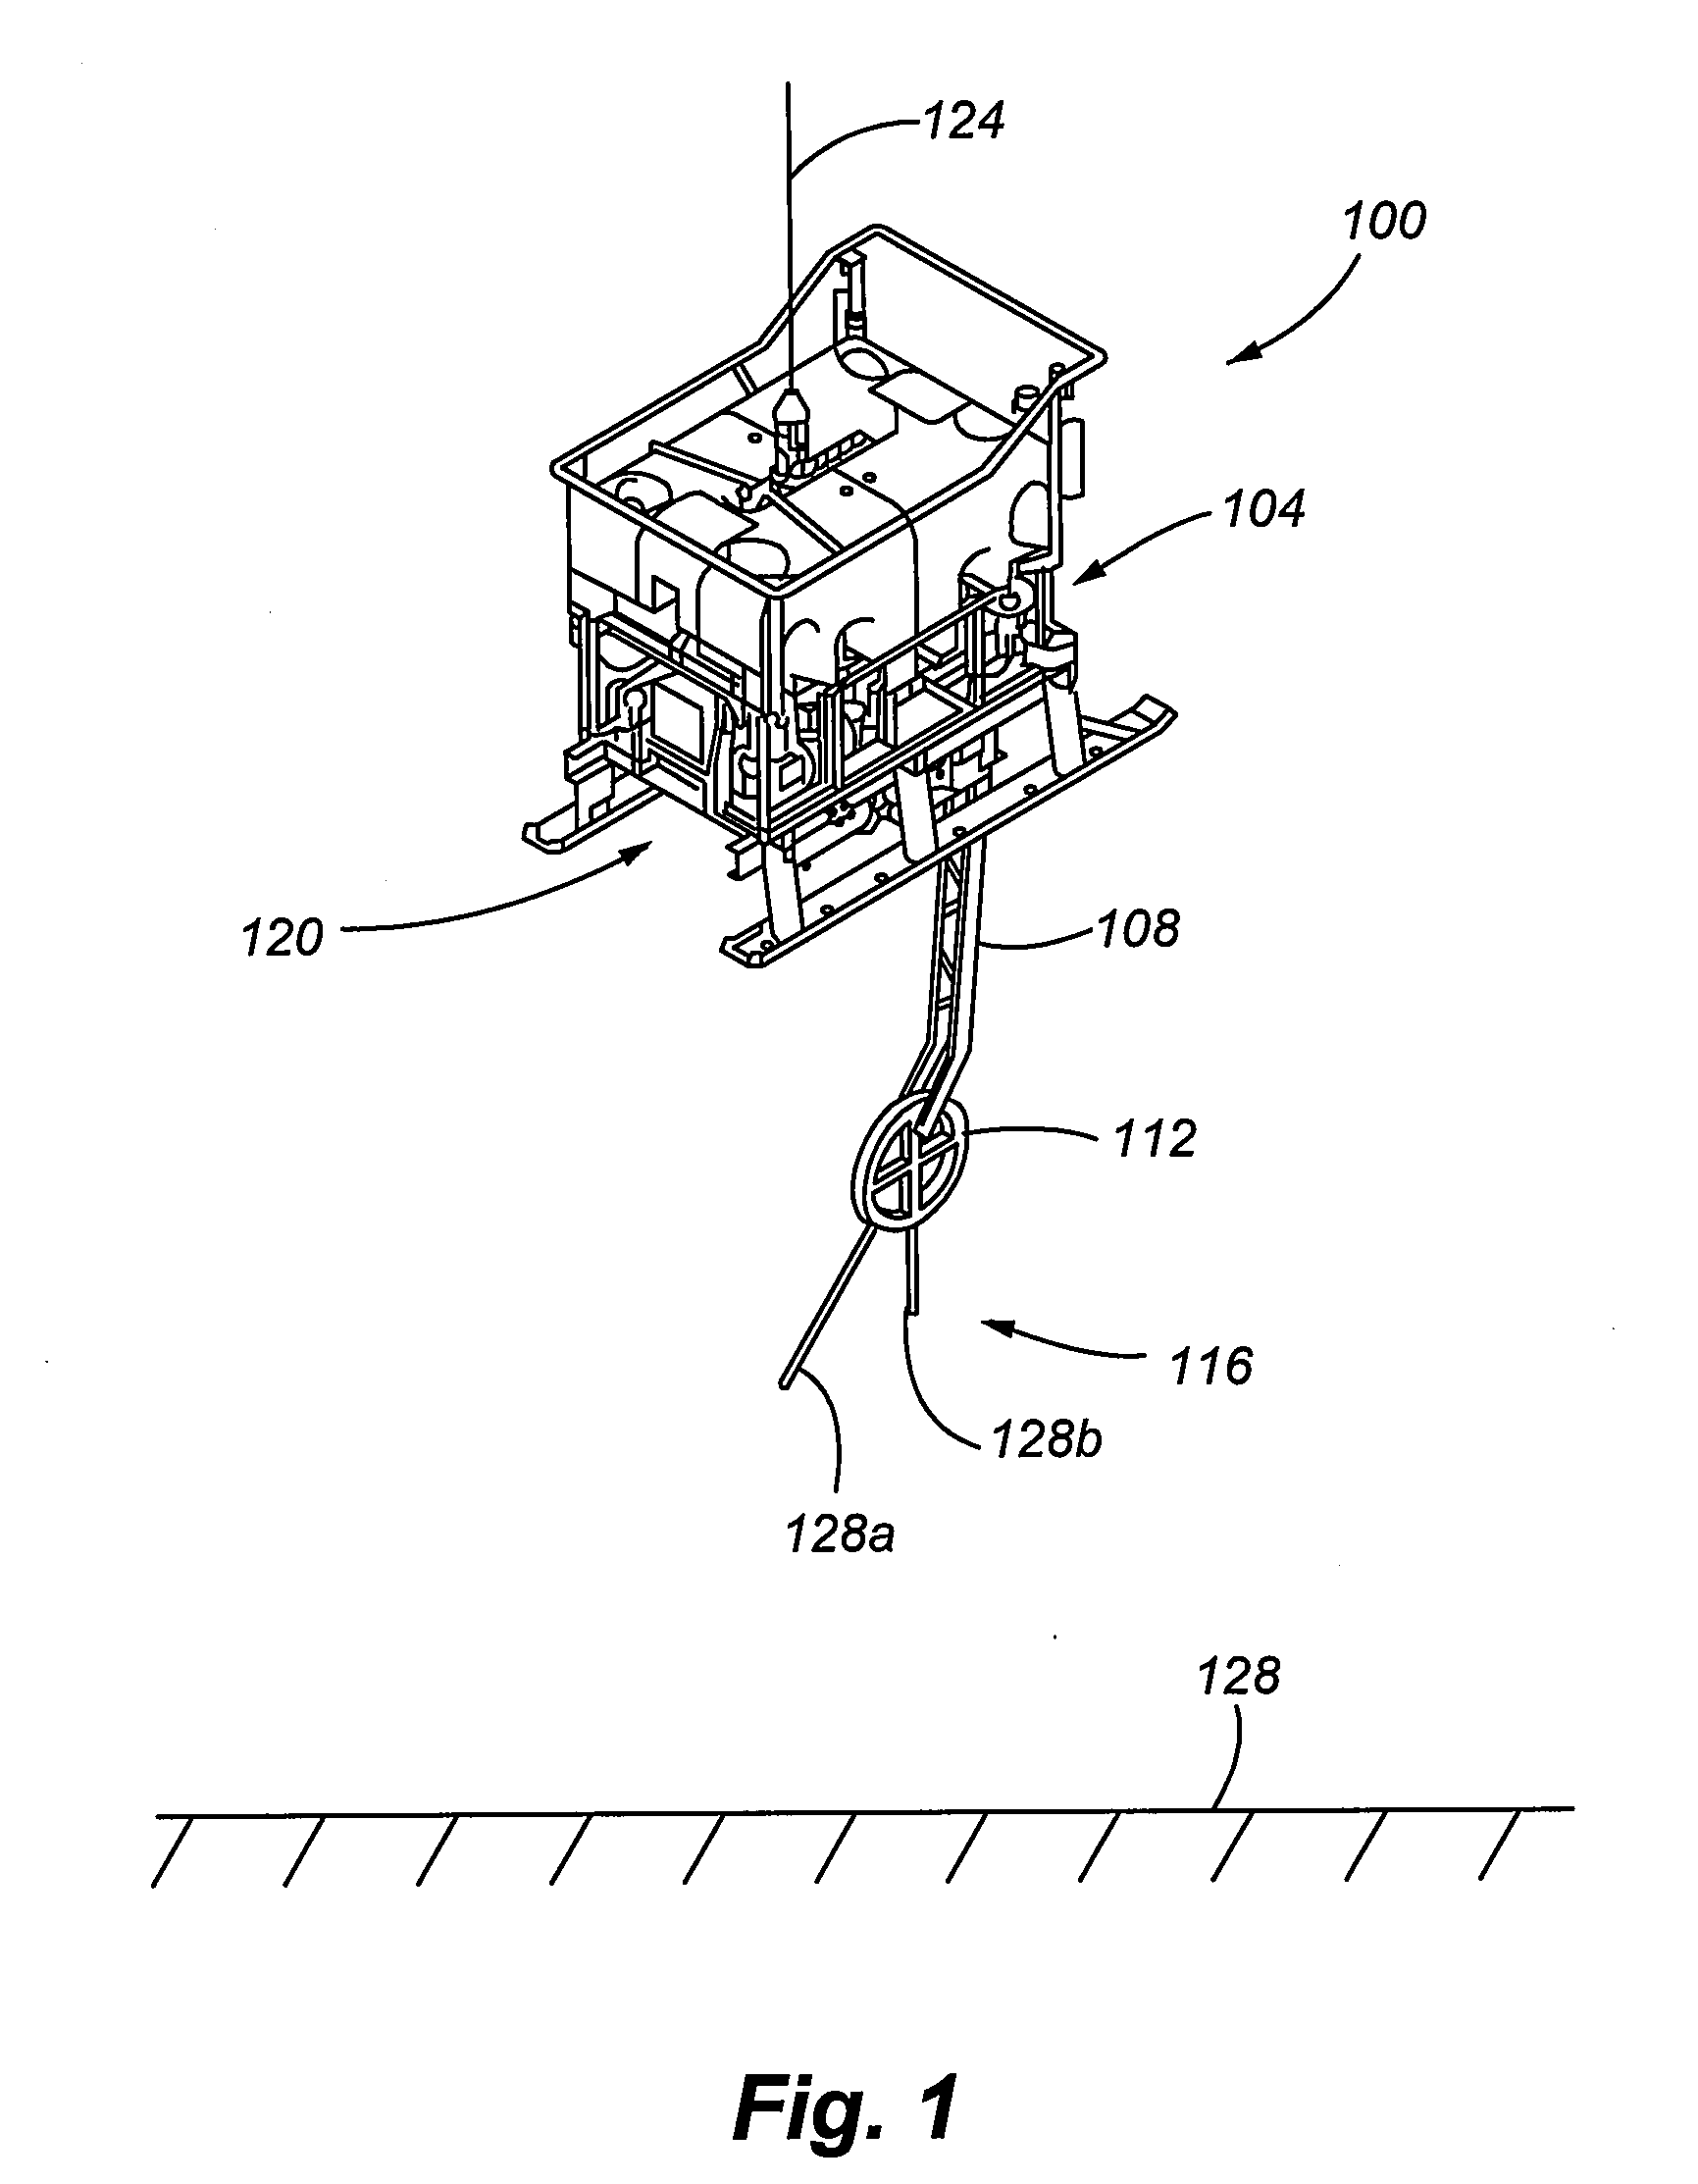 Underwater electric field electromagnetic prospecting system